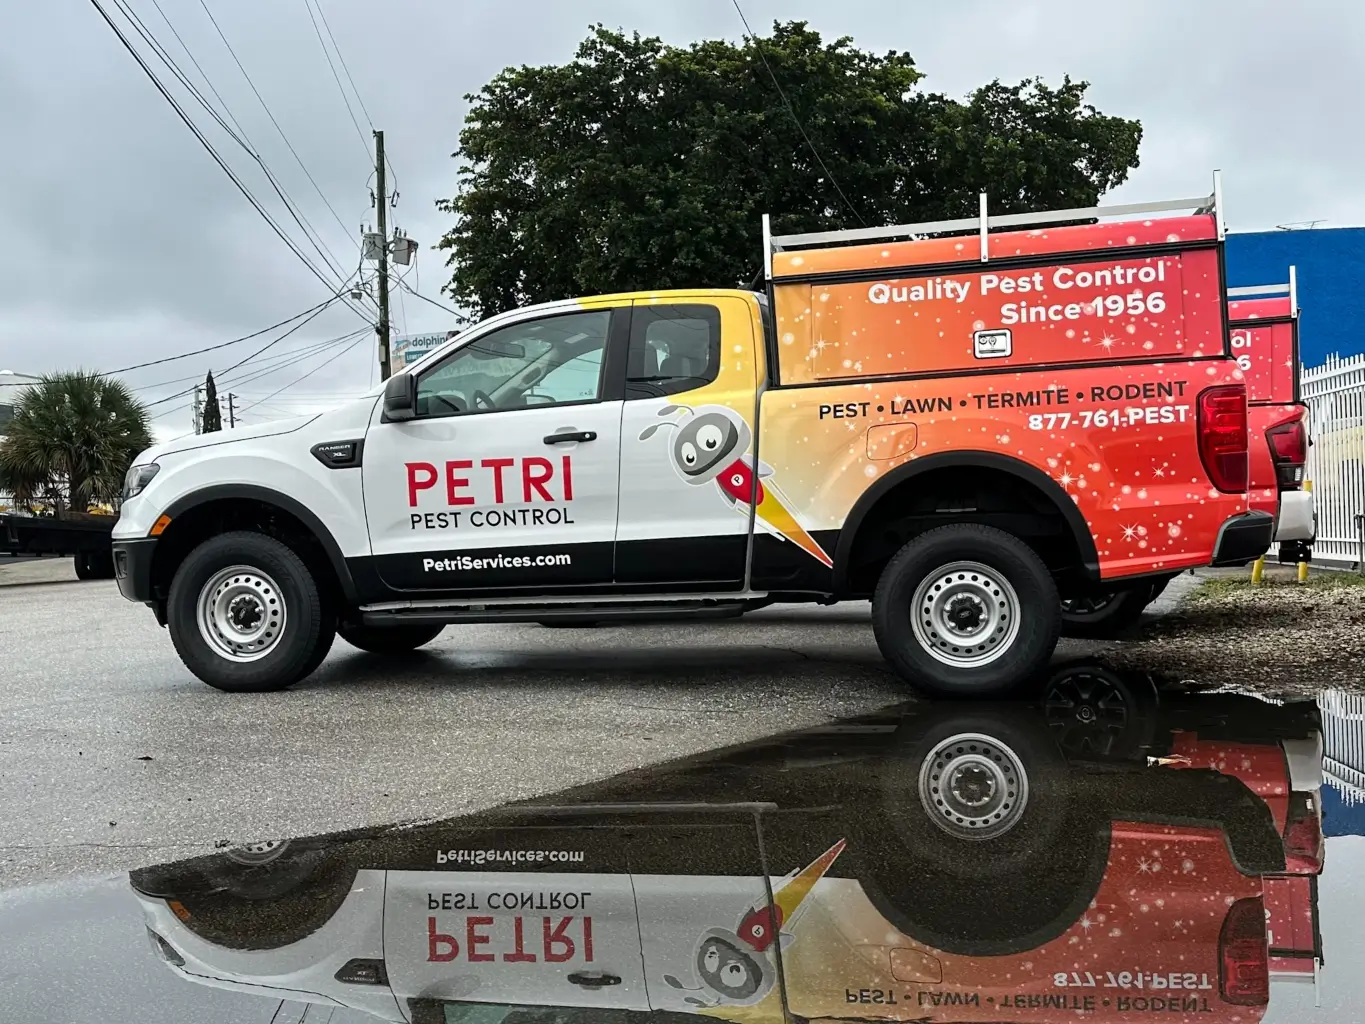 Lawn and shrub care services by Petri Pest Control in South Florida